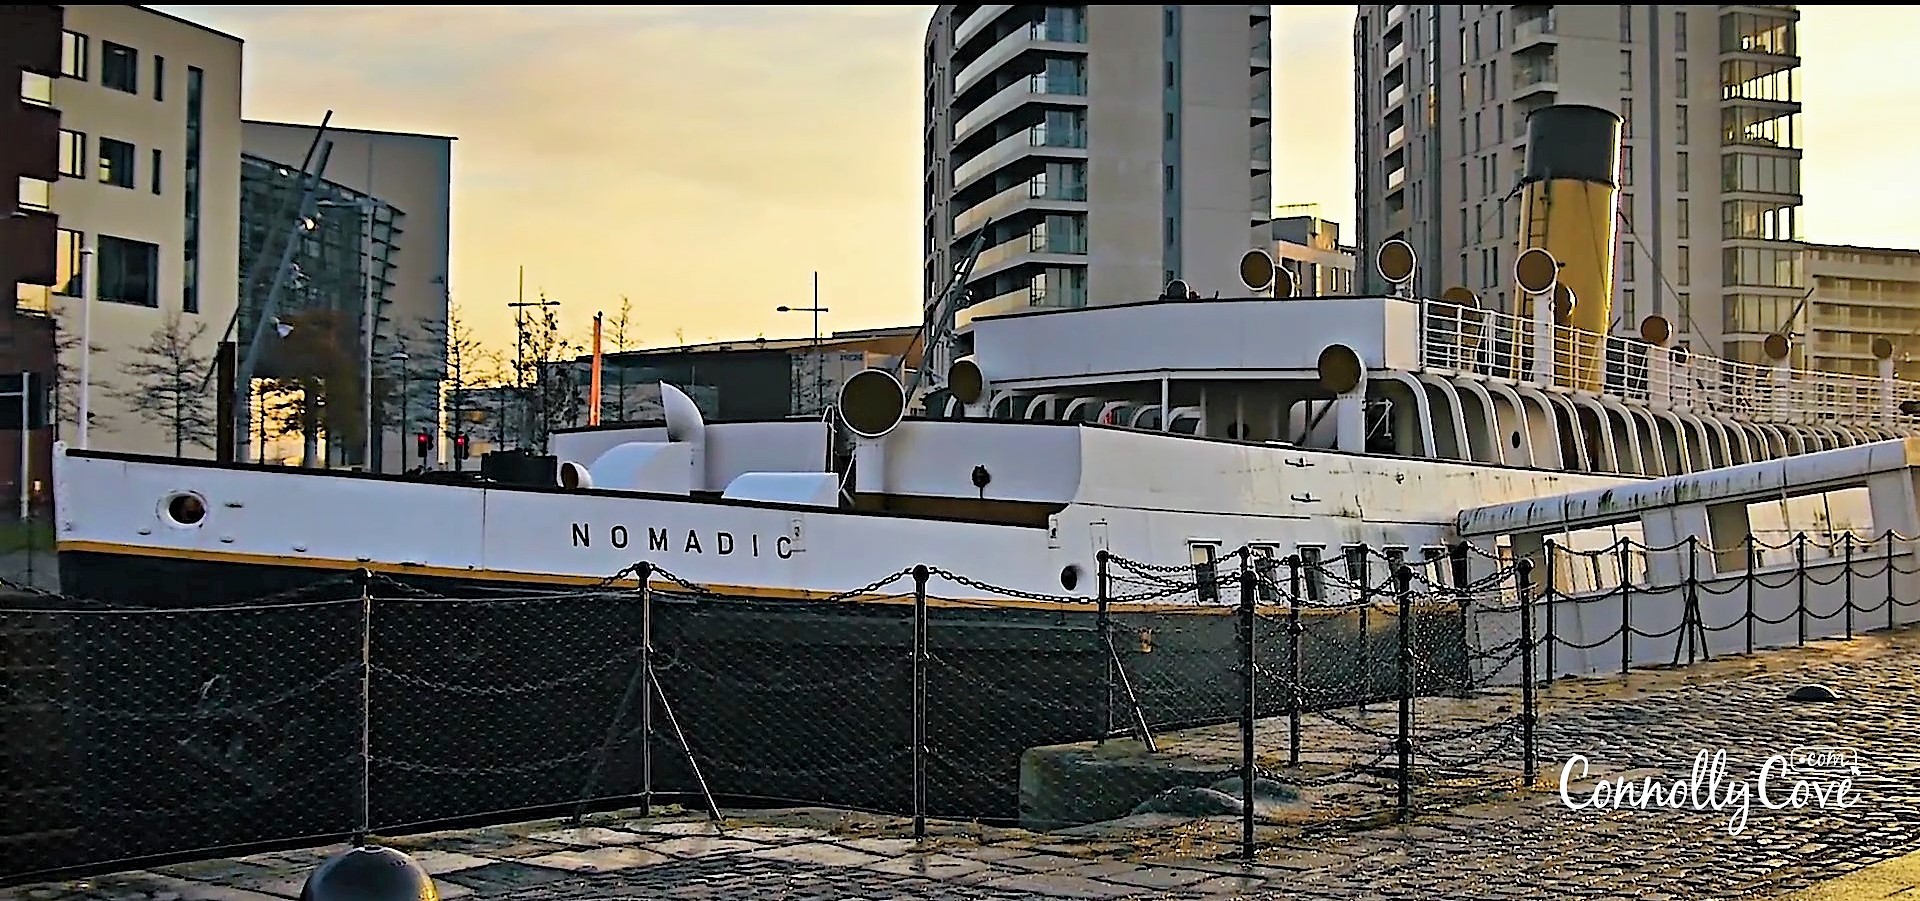 ss nomadic Check out our ultimate guide to things to do in Belfast, we have made note of all the best attractions that you need to visit while on your visit to Belfast, Northern Ireland. So much to see and do you won't be bored in Belfast we can promise that!